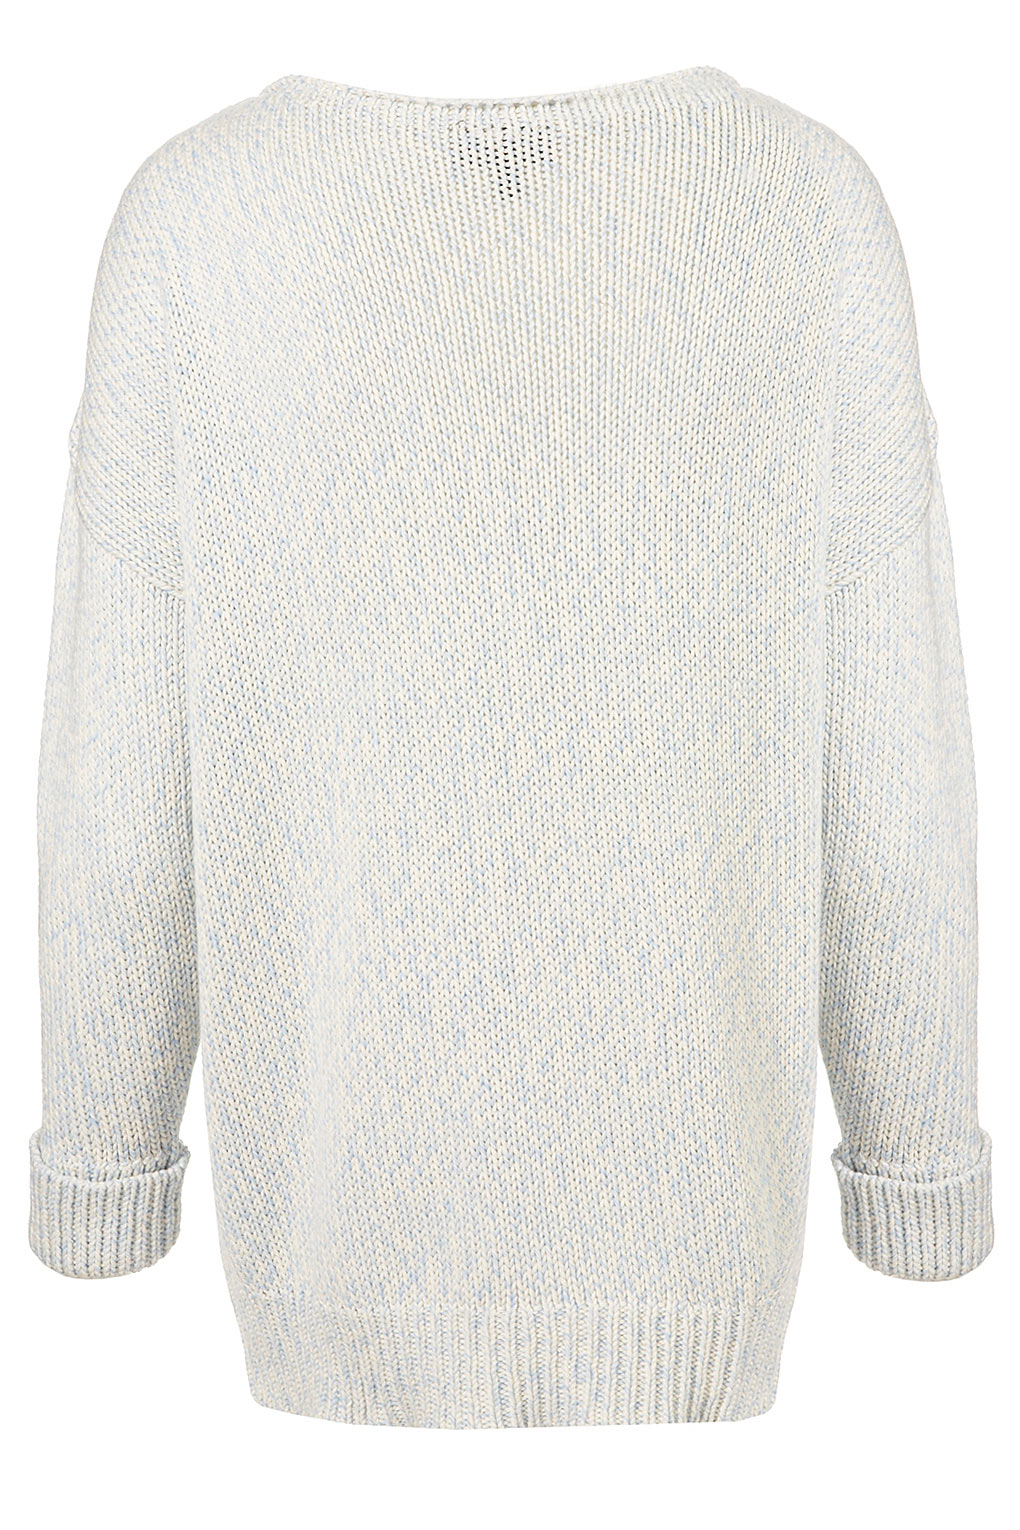 Lyst - Topshop Knitted Speech Bubble Sweater in White